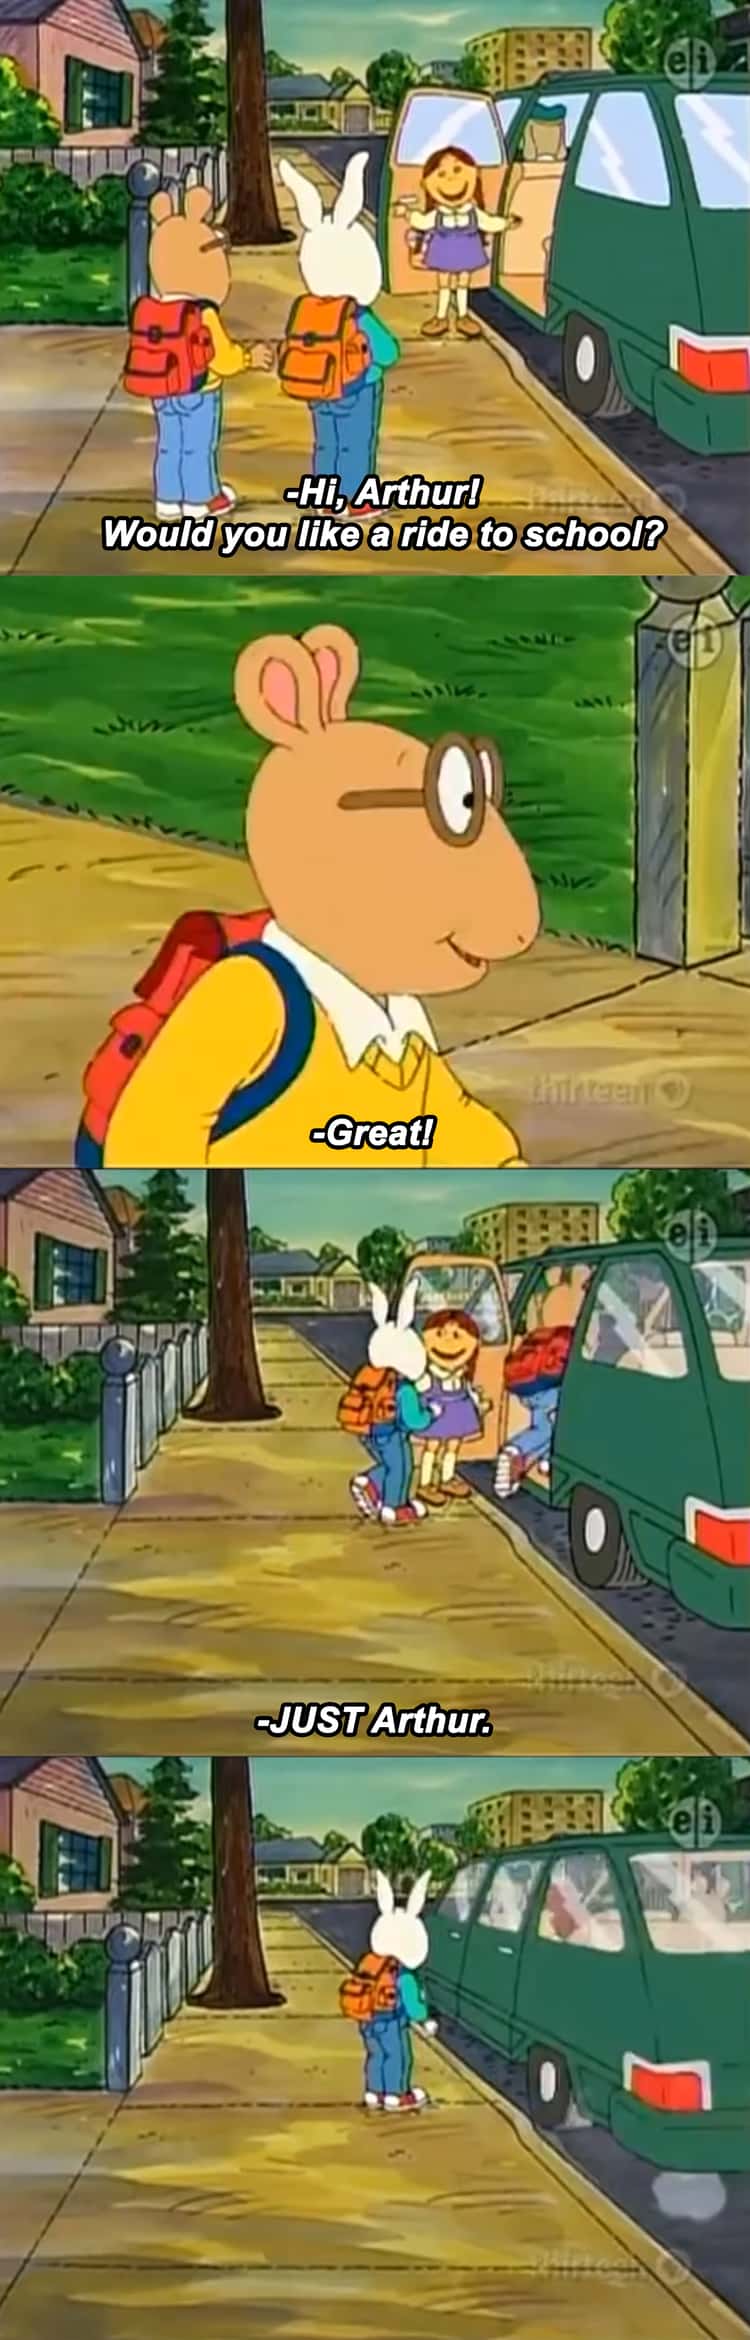 Arthur Tv Show Xxx - 18 Times The Characters From 'Arthur' Threw Some Serious Shade